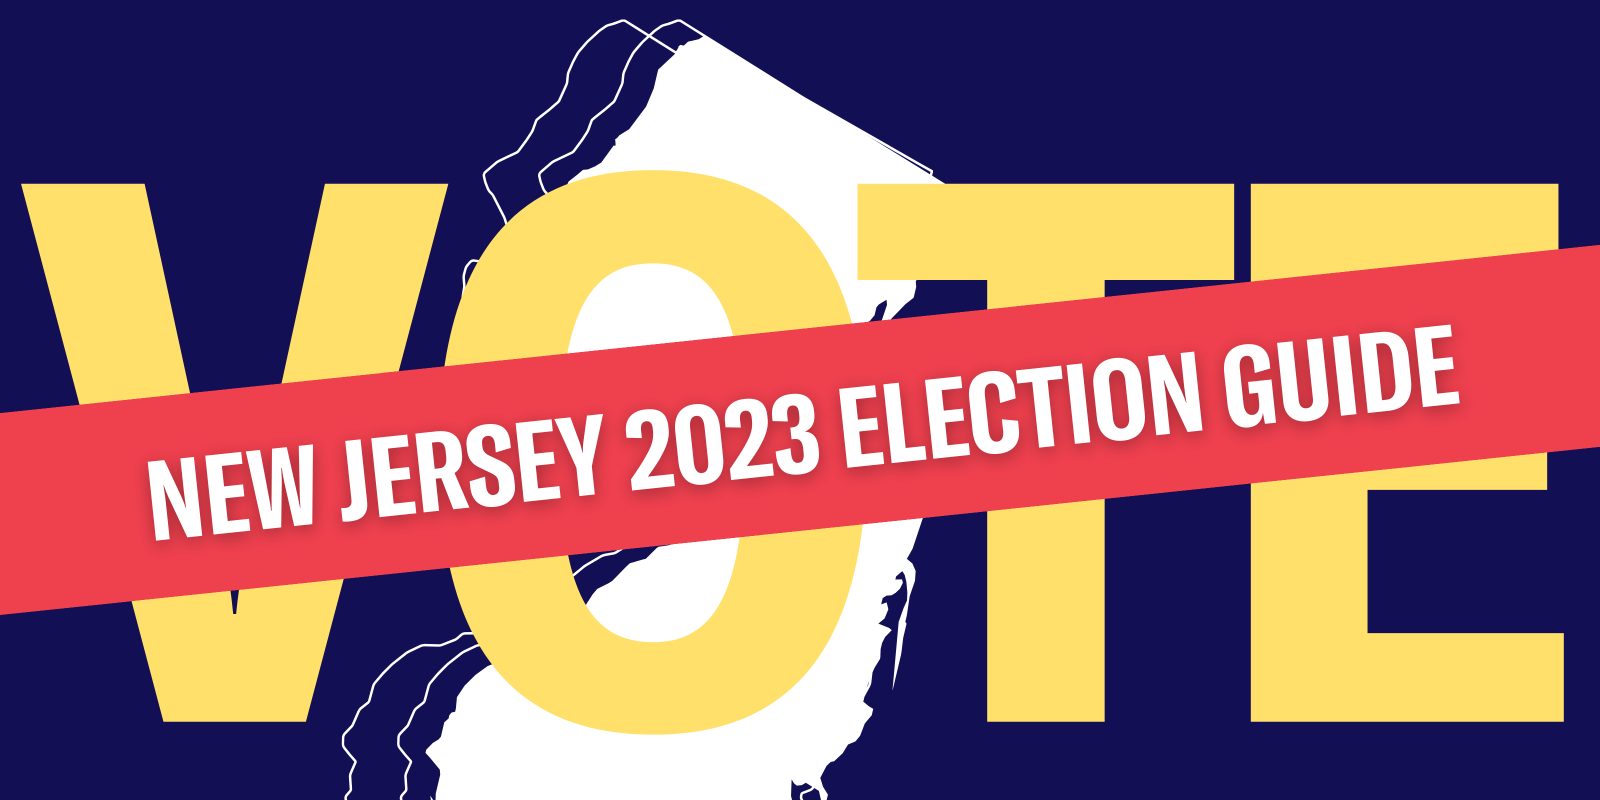 New Jersey 2023 Election Guide on a blue background with an image of New Jersey